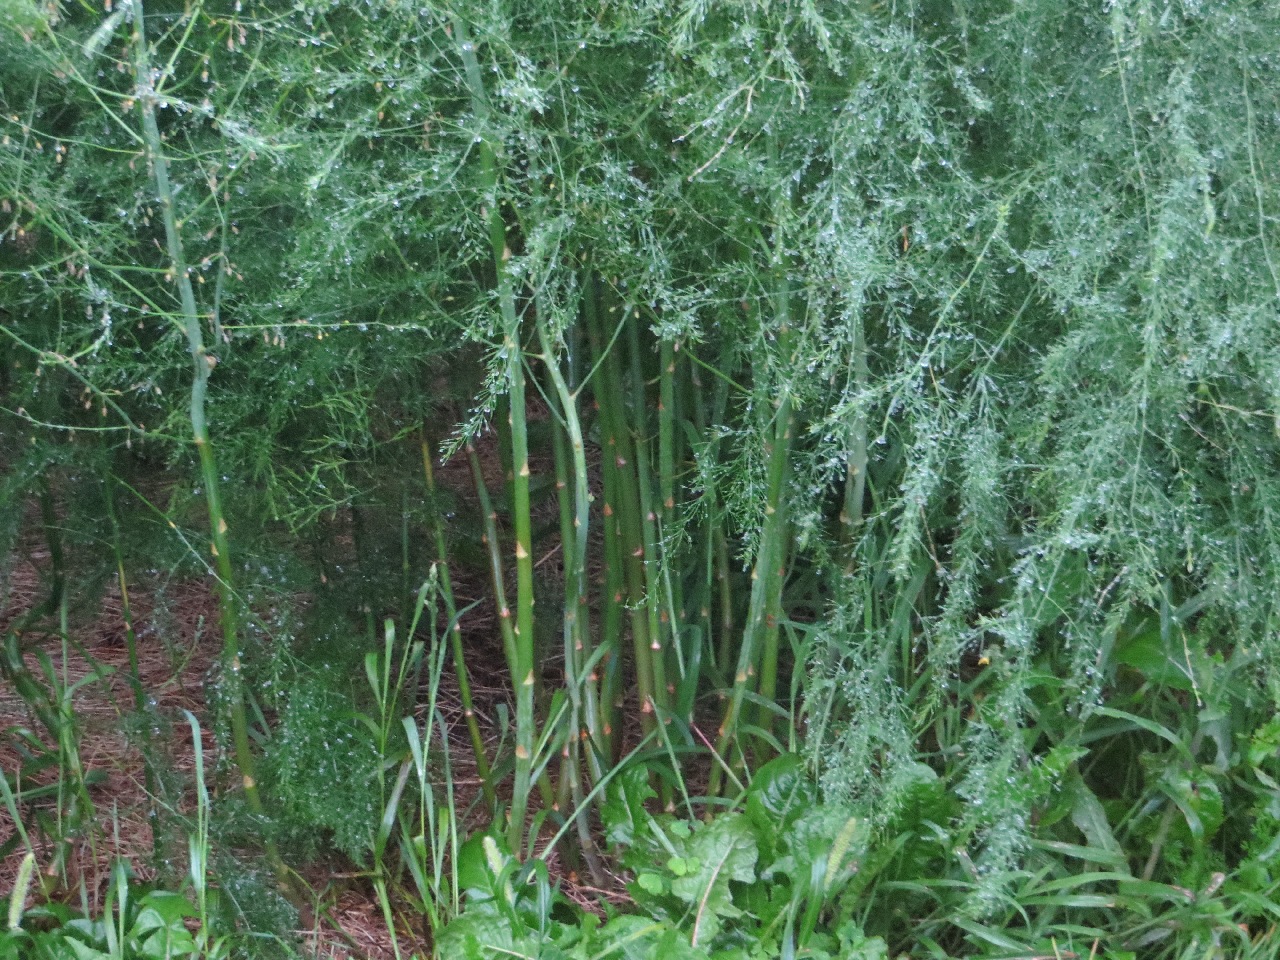 Tall green stems with the upward-pointing triangles like you see on asparagus when you eat it, with feathery fronds hanging down loaded with water droplets from the rain.